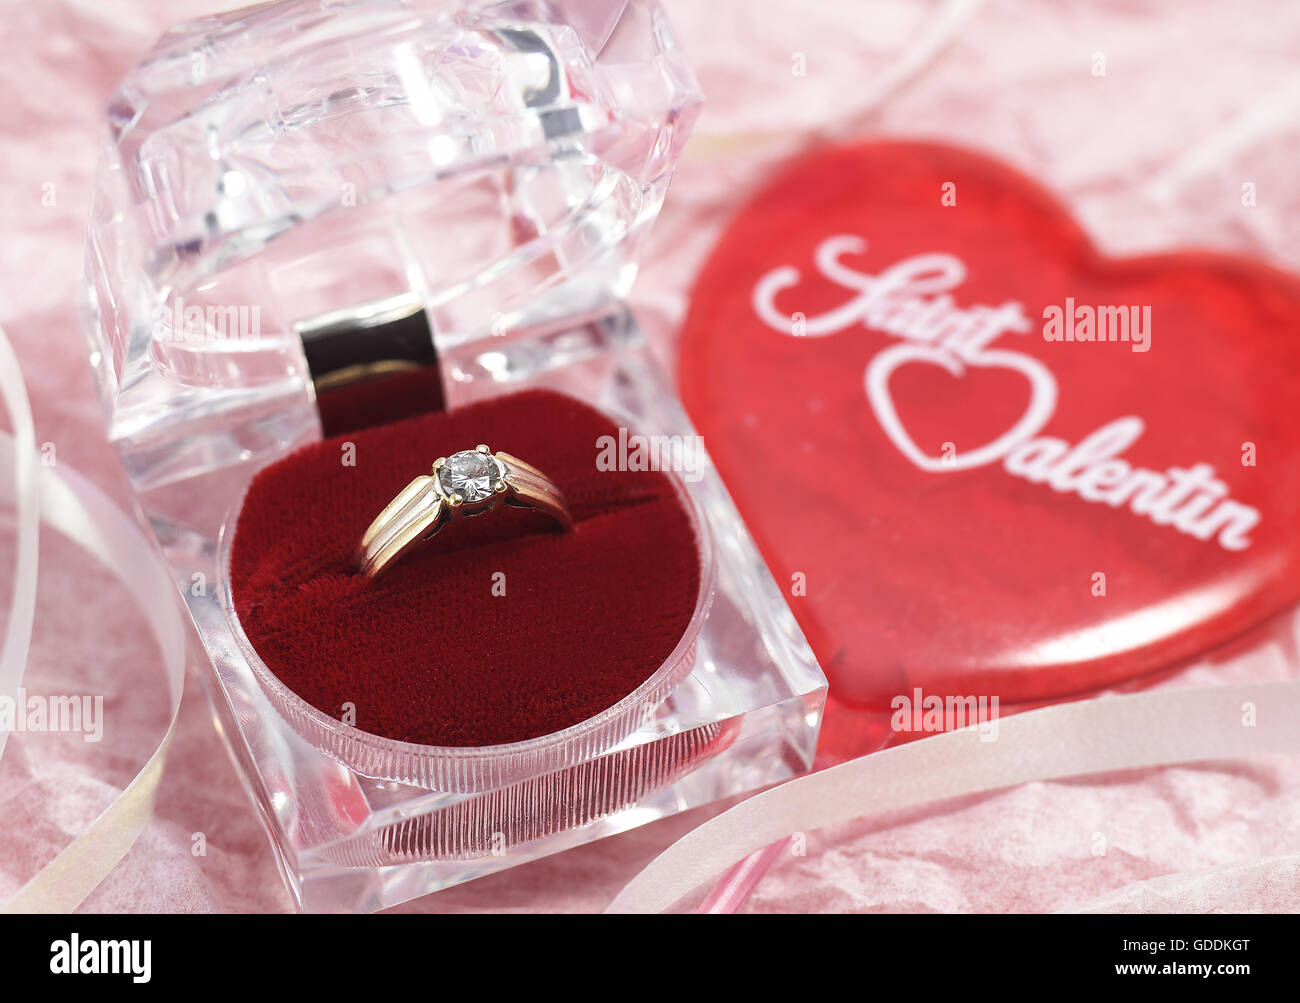 Diamond Ring offered on Valentine's Day Stock Photo